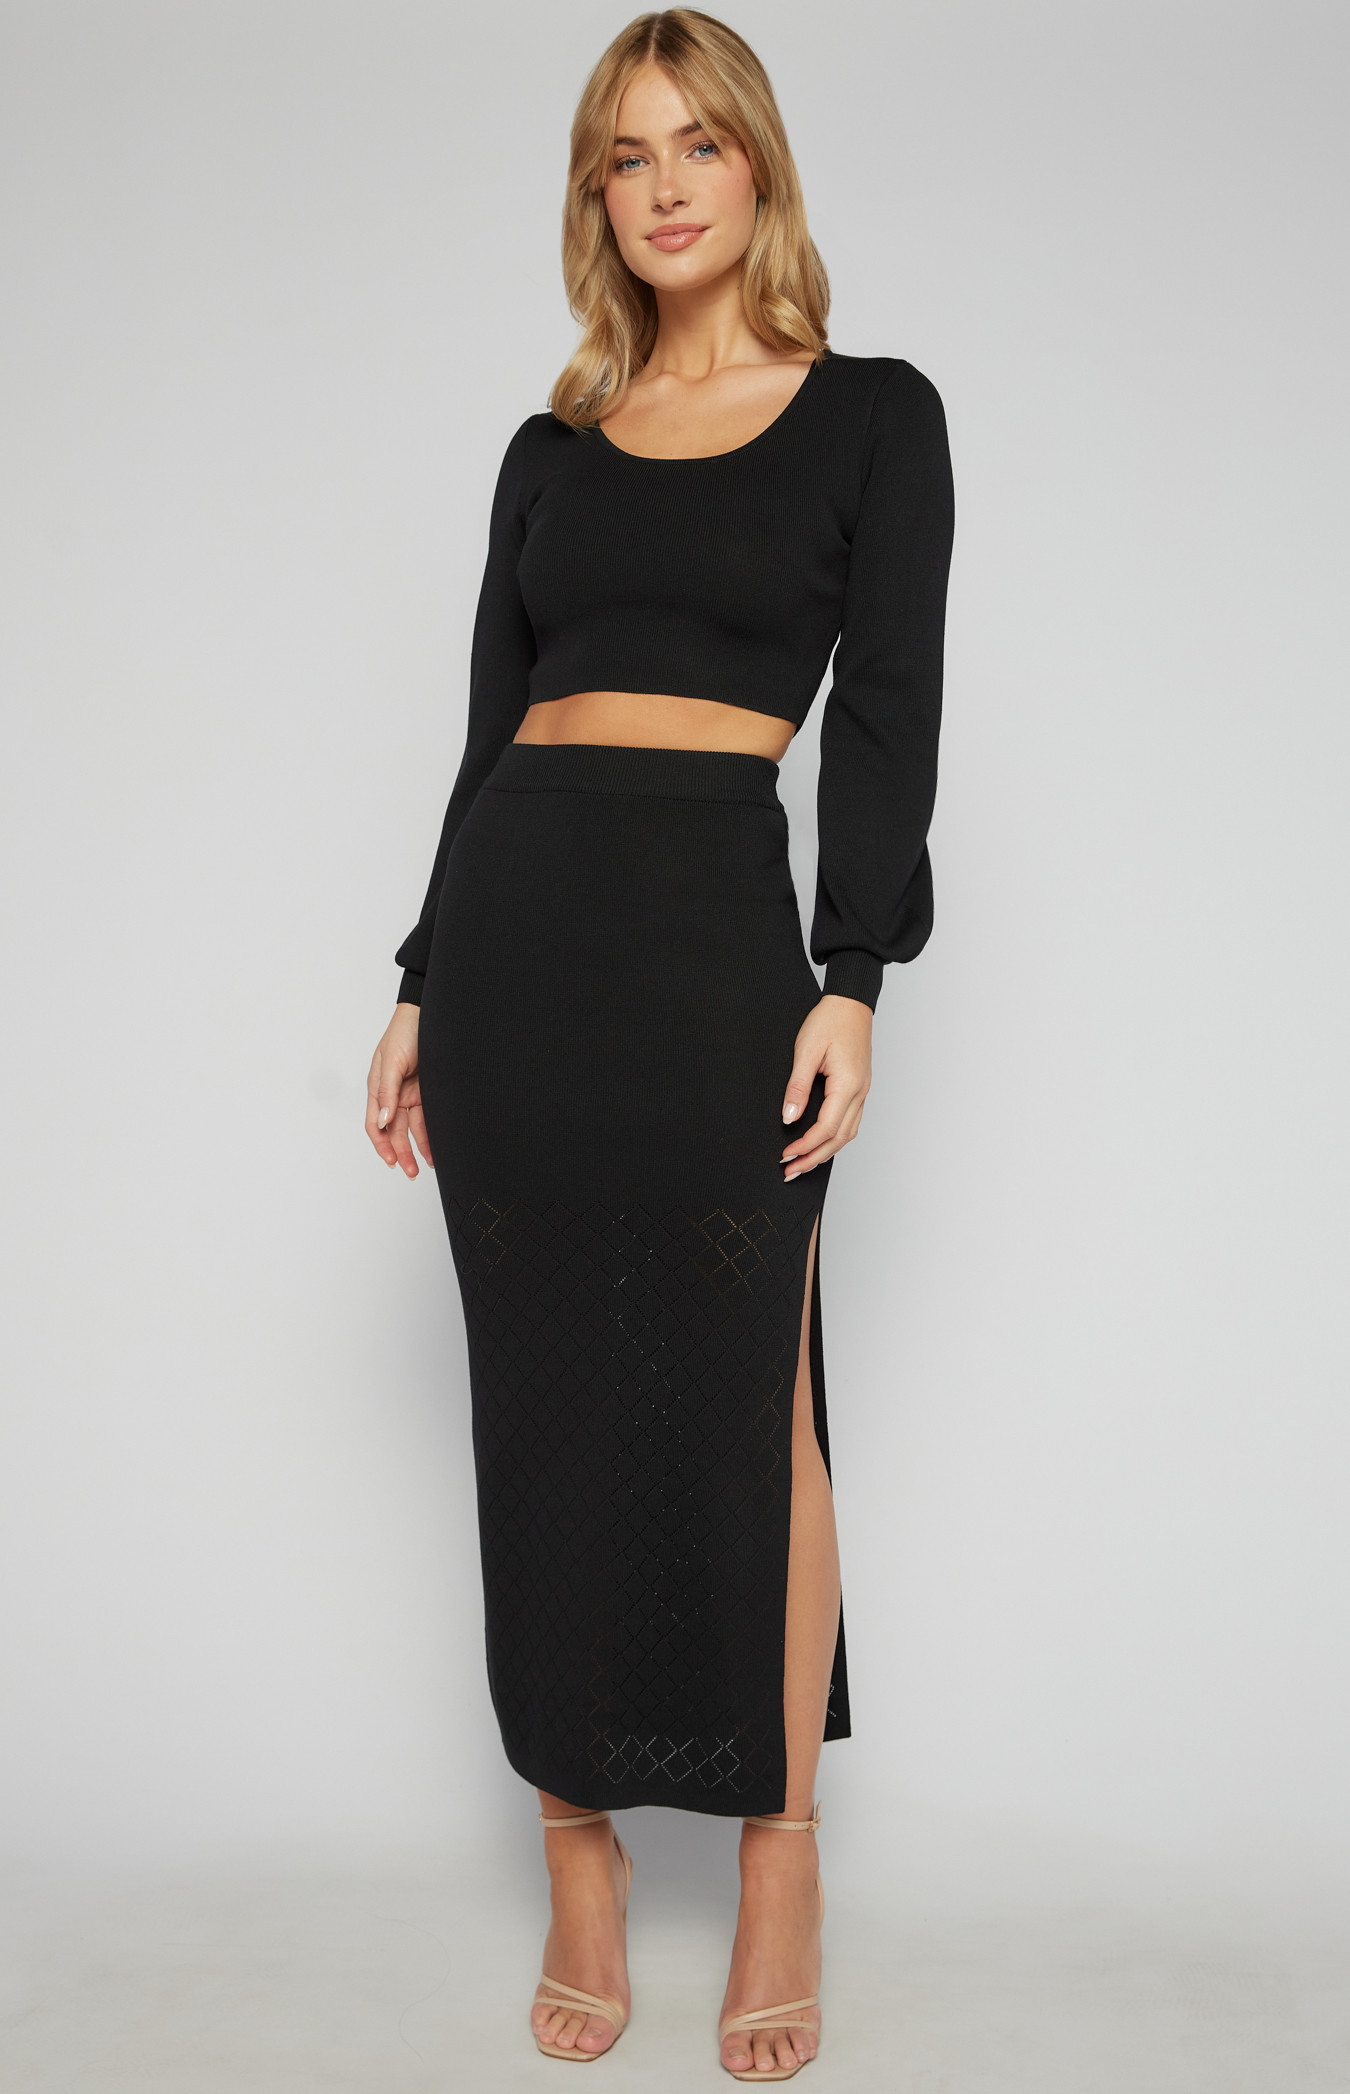 Contrast Textured Hem Knit Set with Top and Maxi Skirt (SKN832)